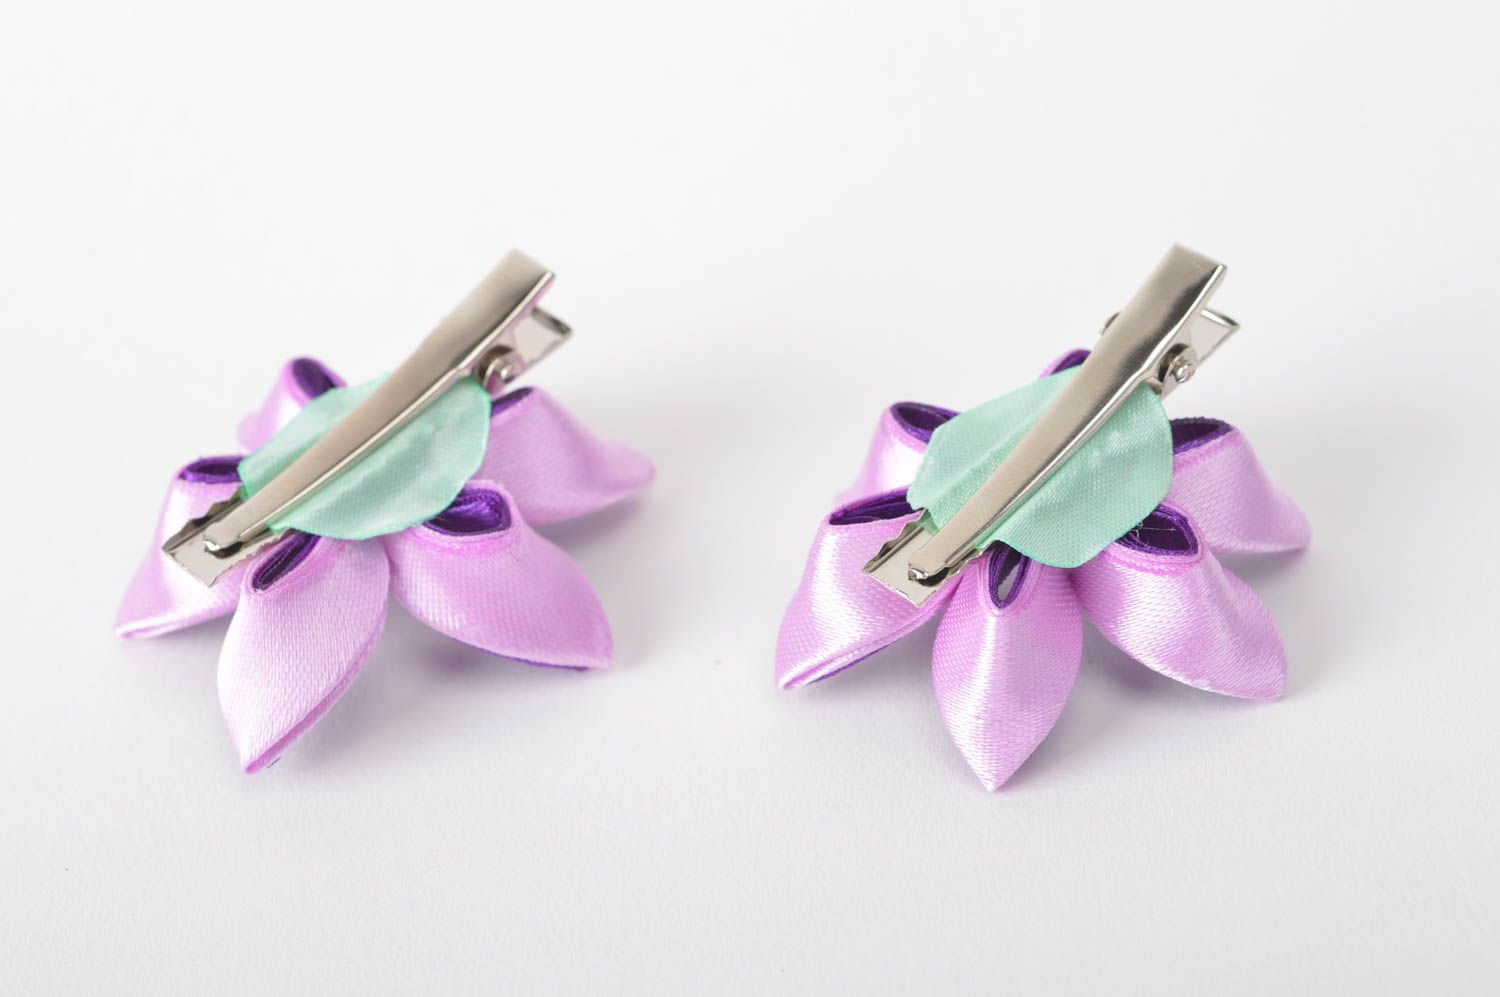 Handmade hair clips for kids stylish kanzashi hair clips 2 pieces violets photo 1